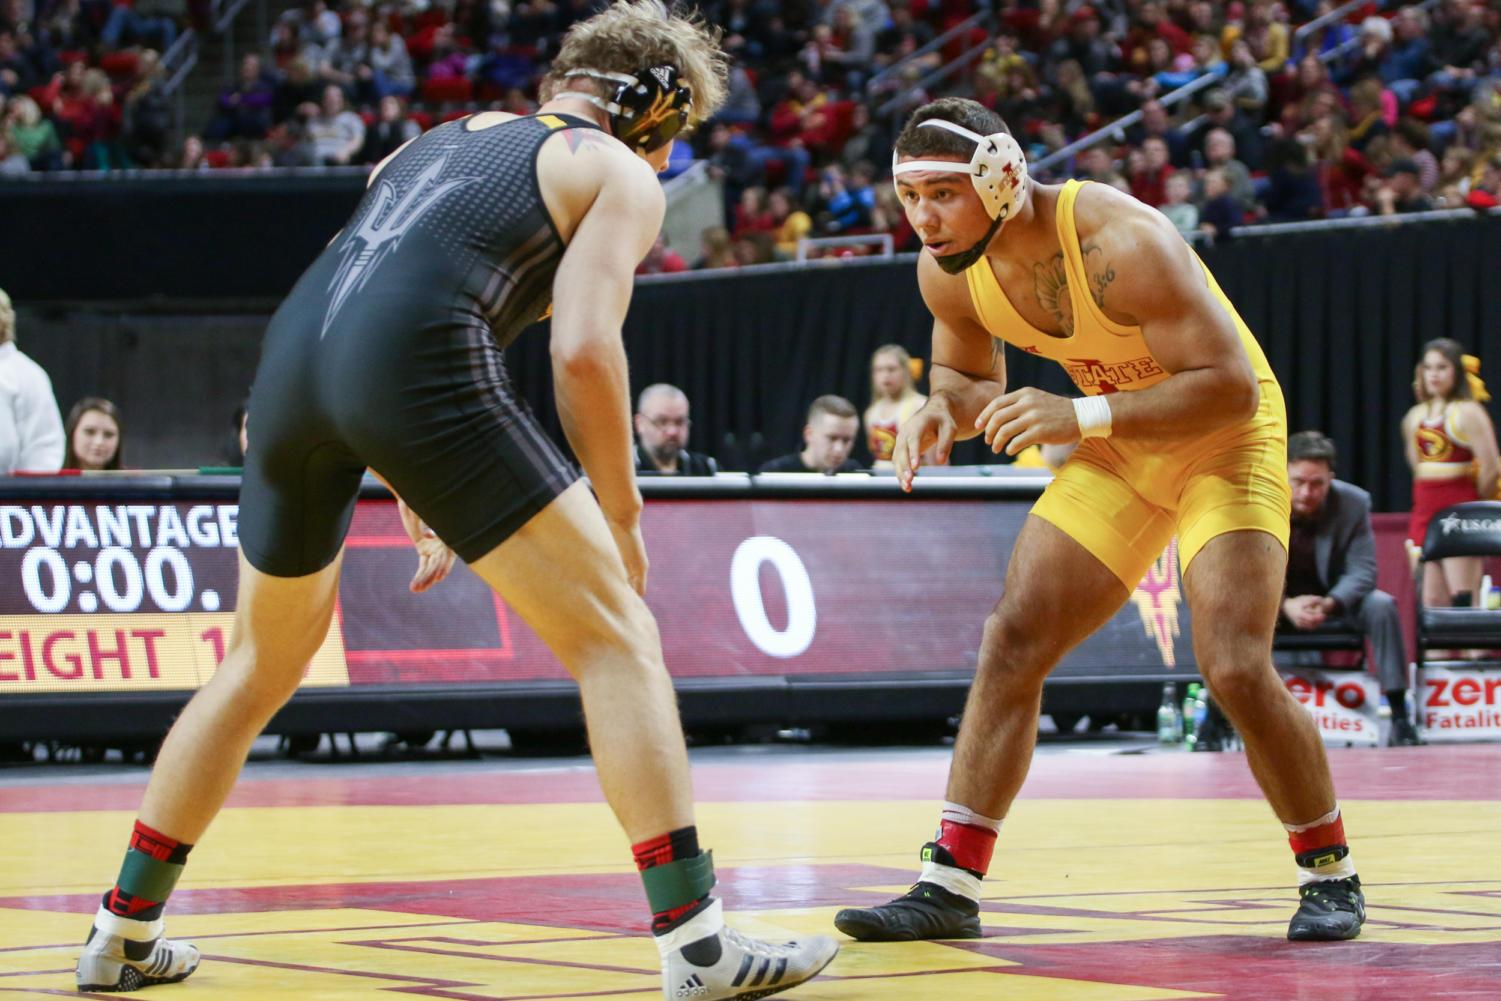 The second Beauty and the Beast is pivotal event for Iowa State